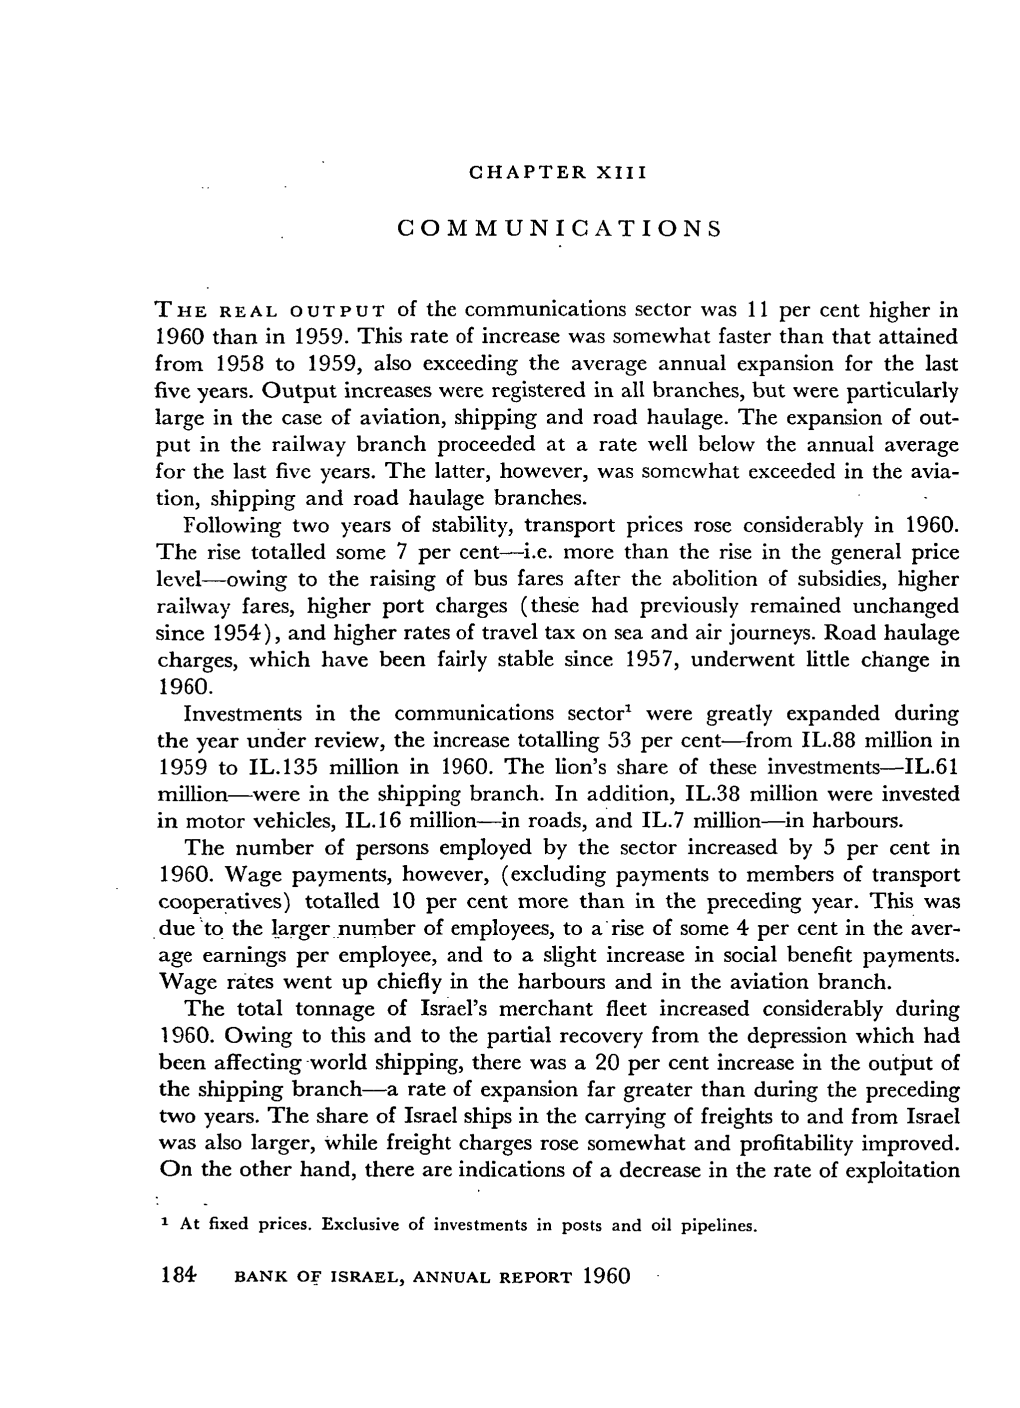 The Real Output of the Communications Sector Was 11 Per Cent Higher in 1960 Than in 1959